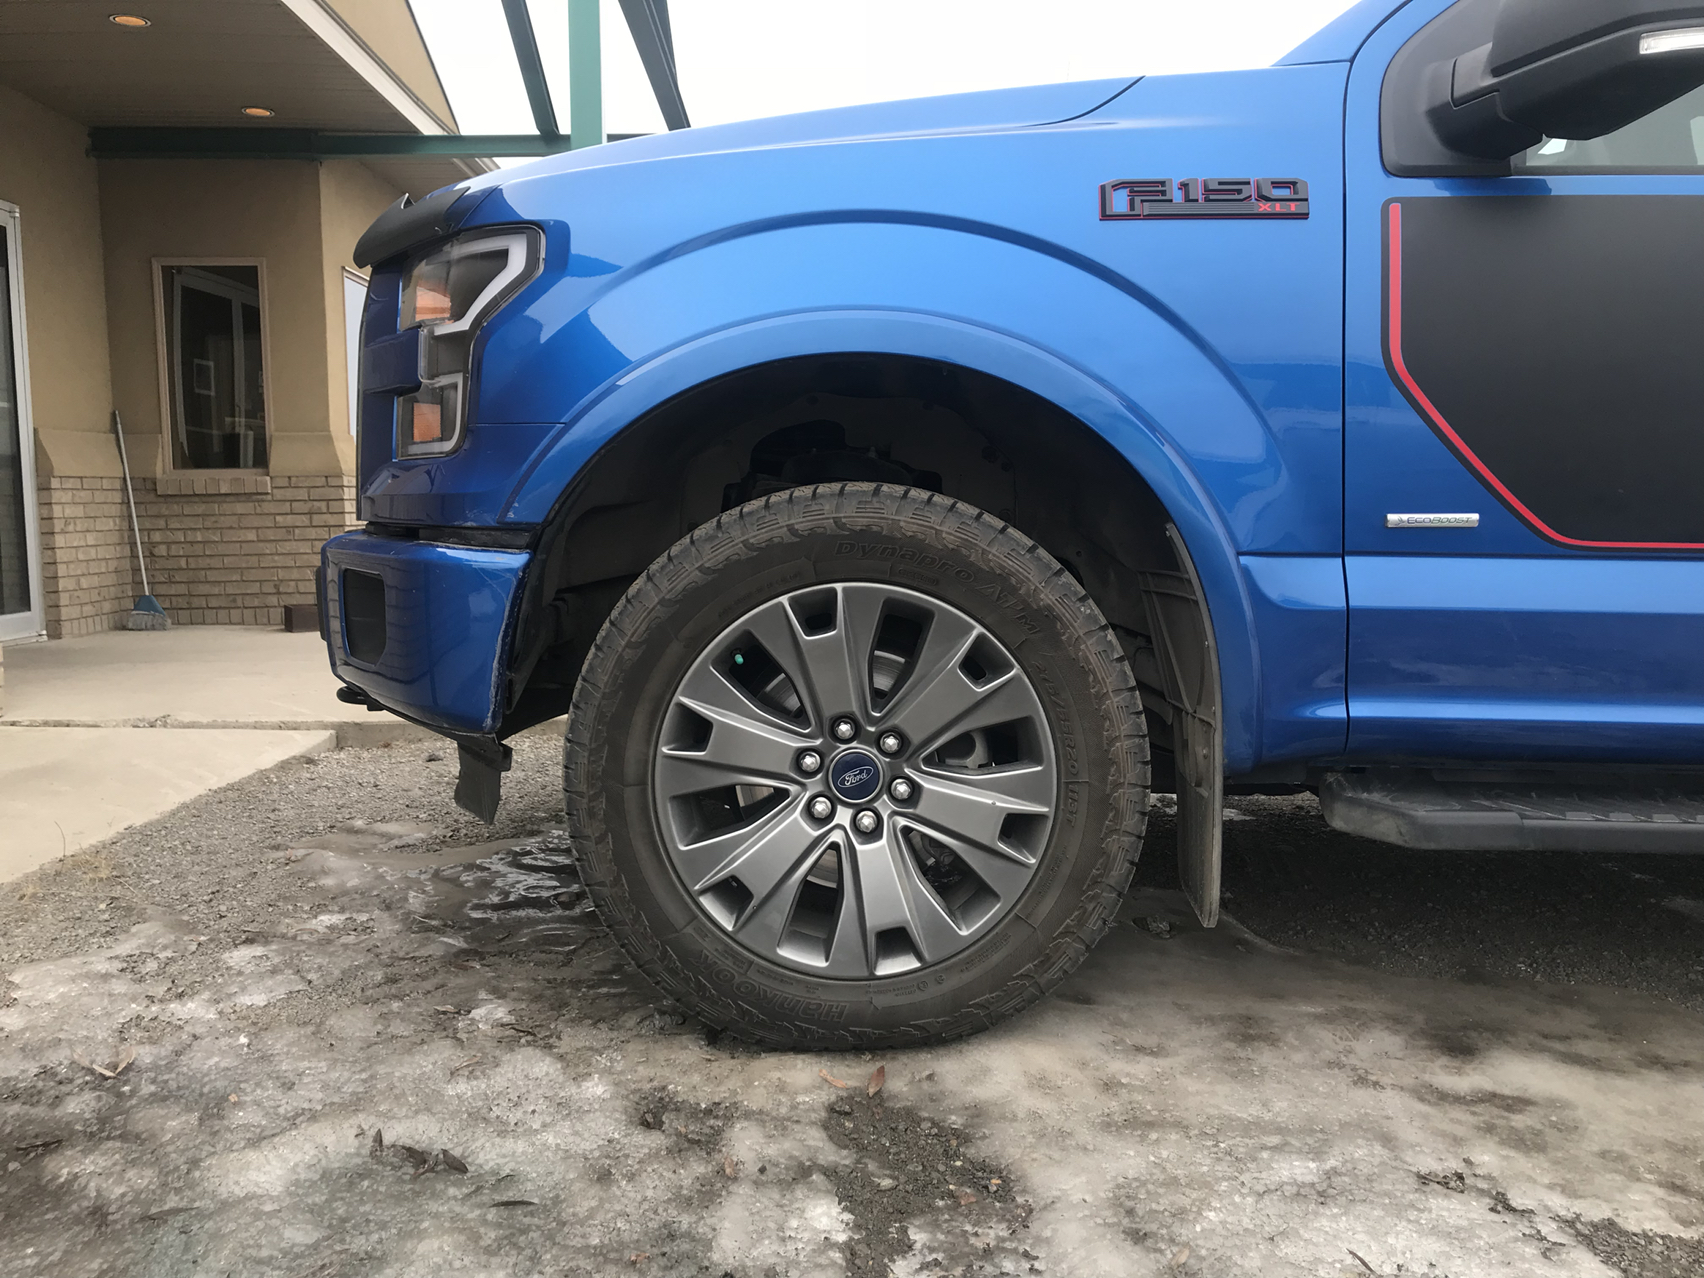 Duratracs 275 55 R Or 275 60 R Ford F150 Forum Community Of Ford Truck Fans